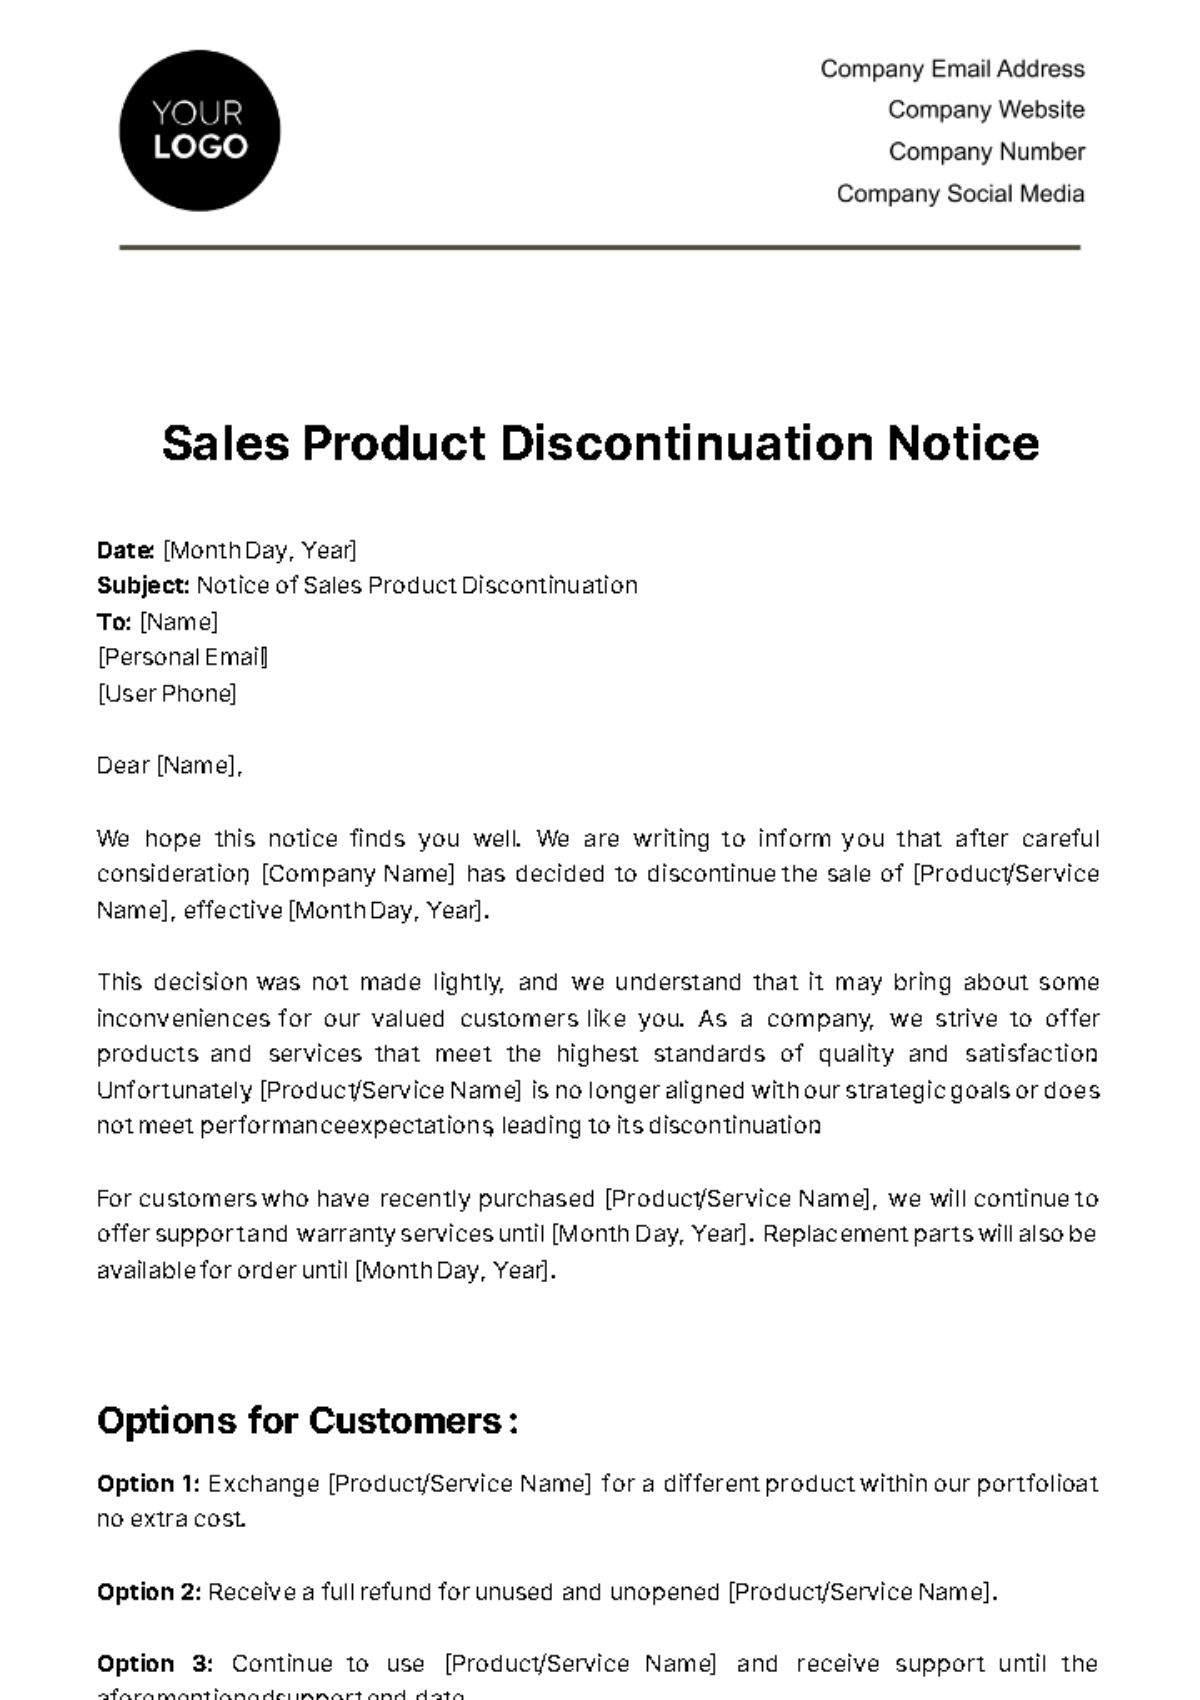 Sales Product Discontinuation Notice Template